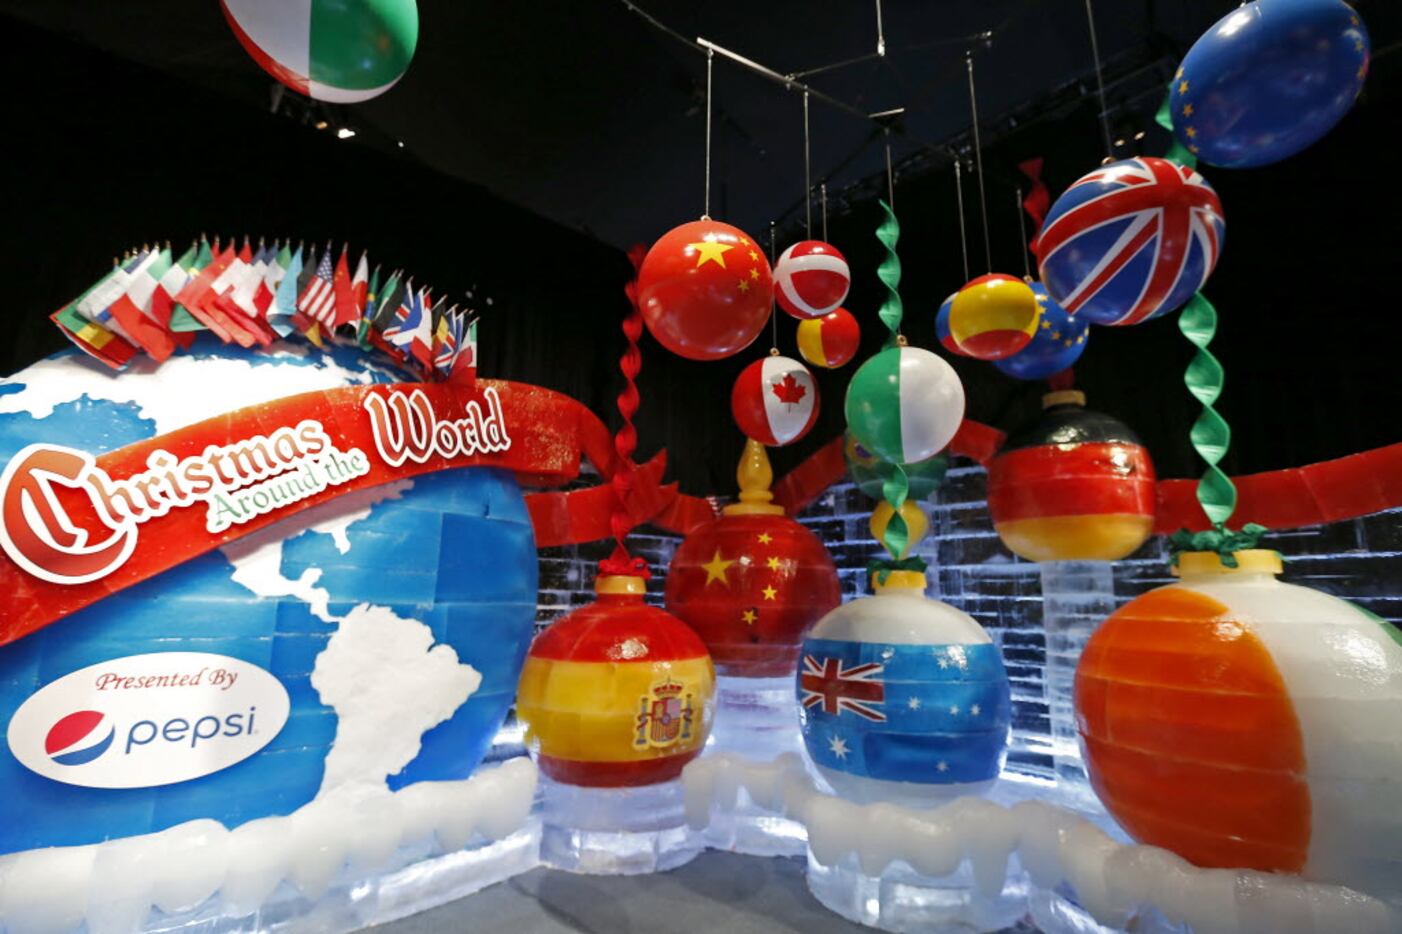 The Ice! exhibit features the Christmas Around the World theme showing flags from countries...